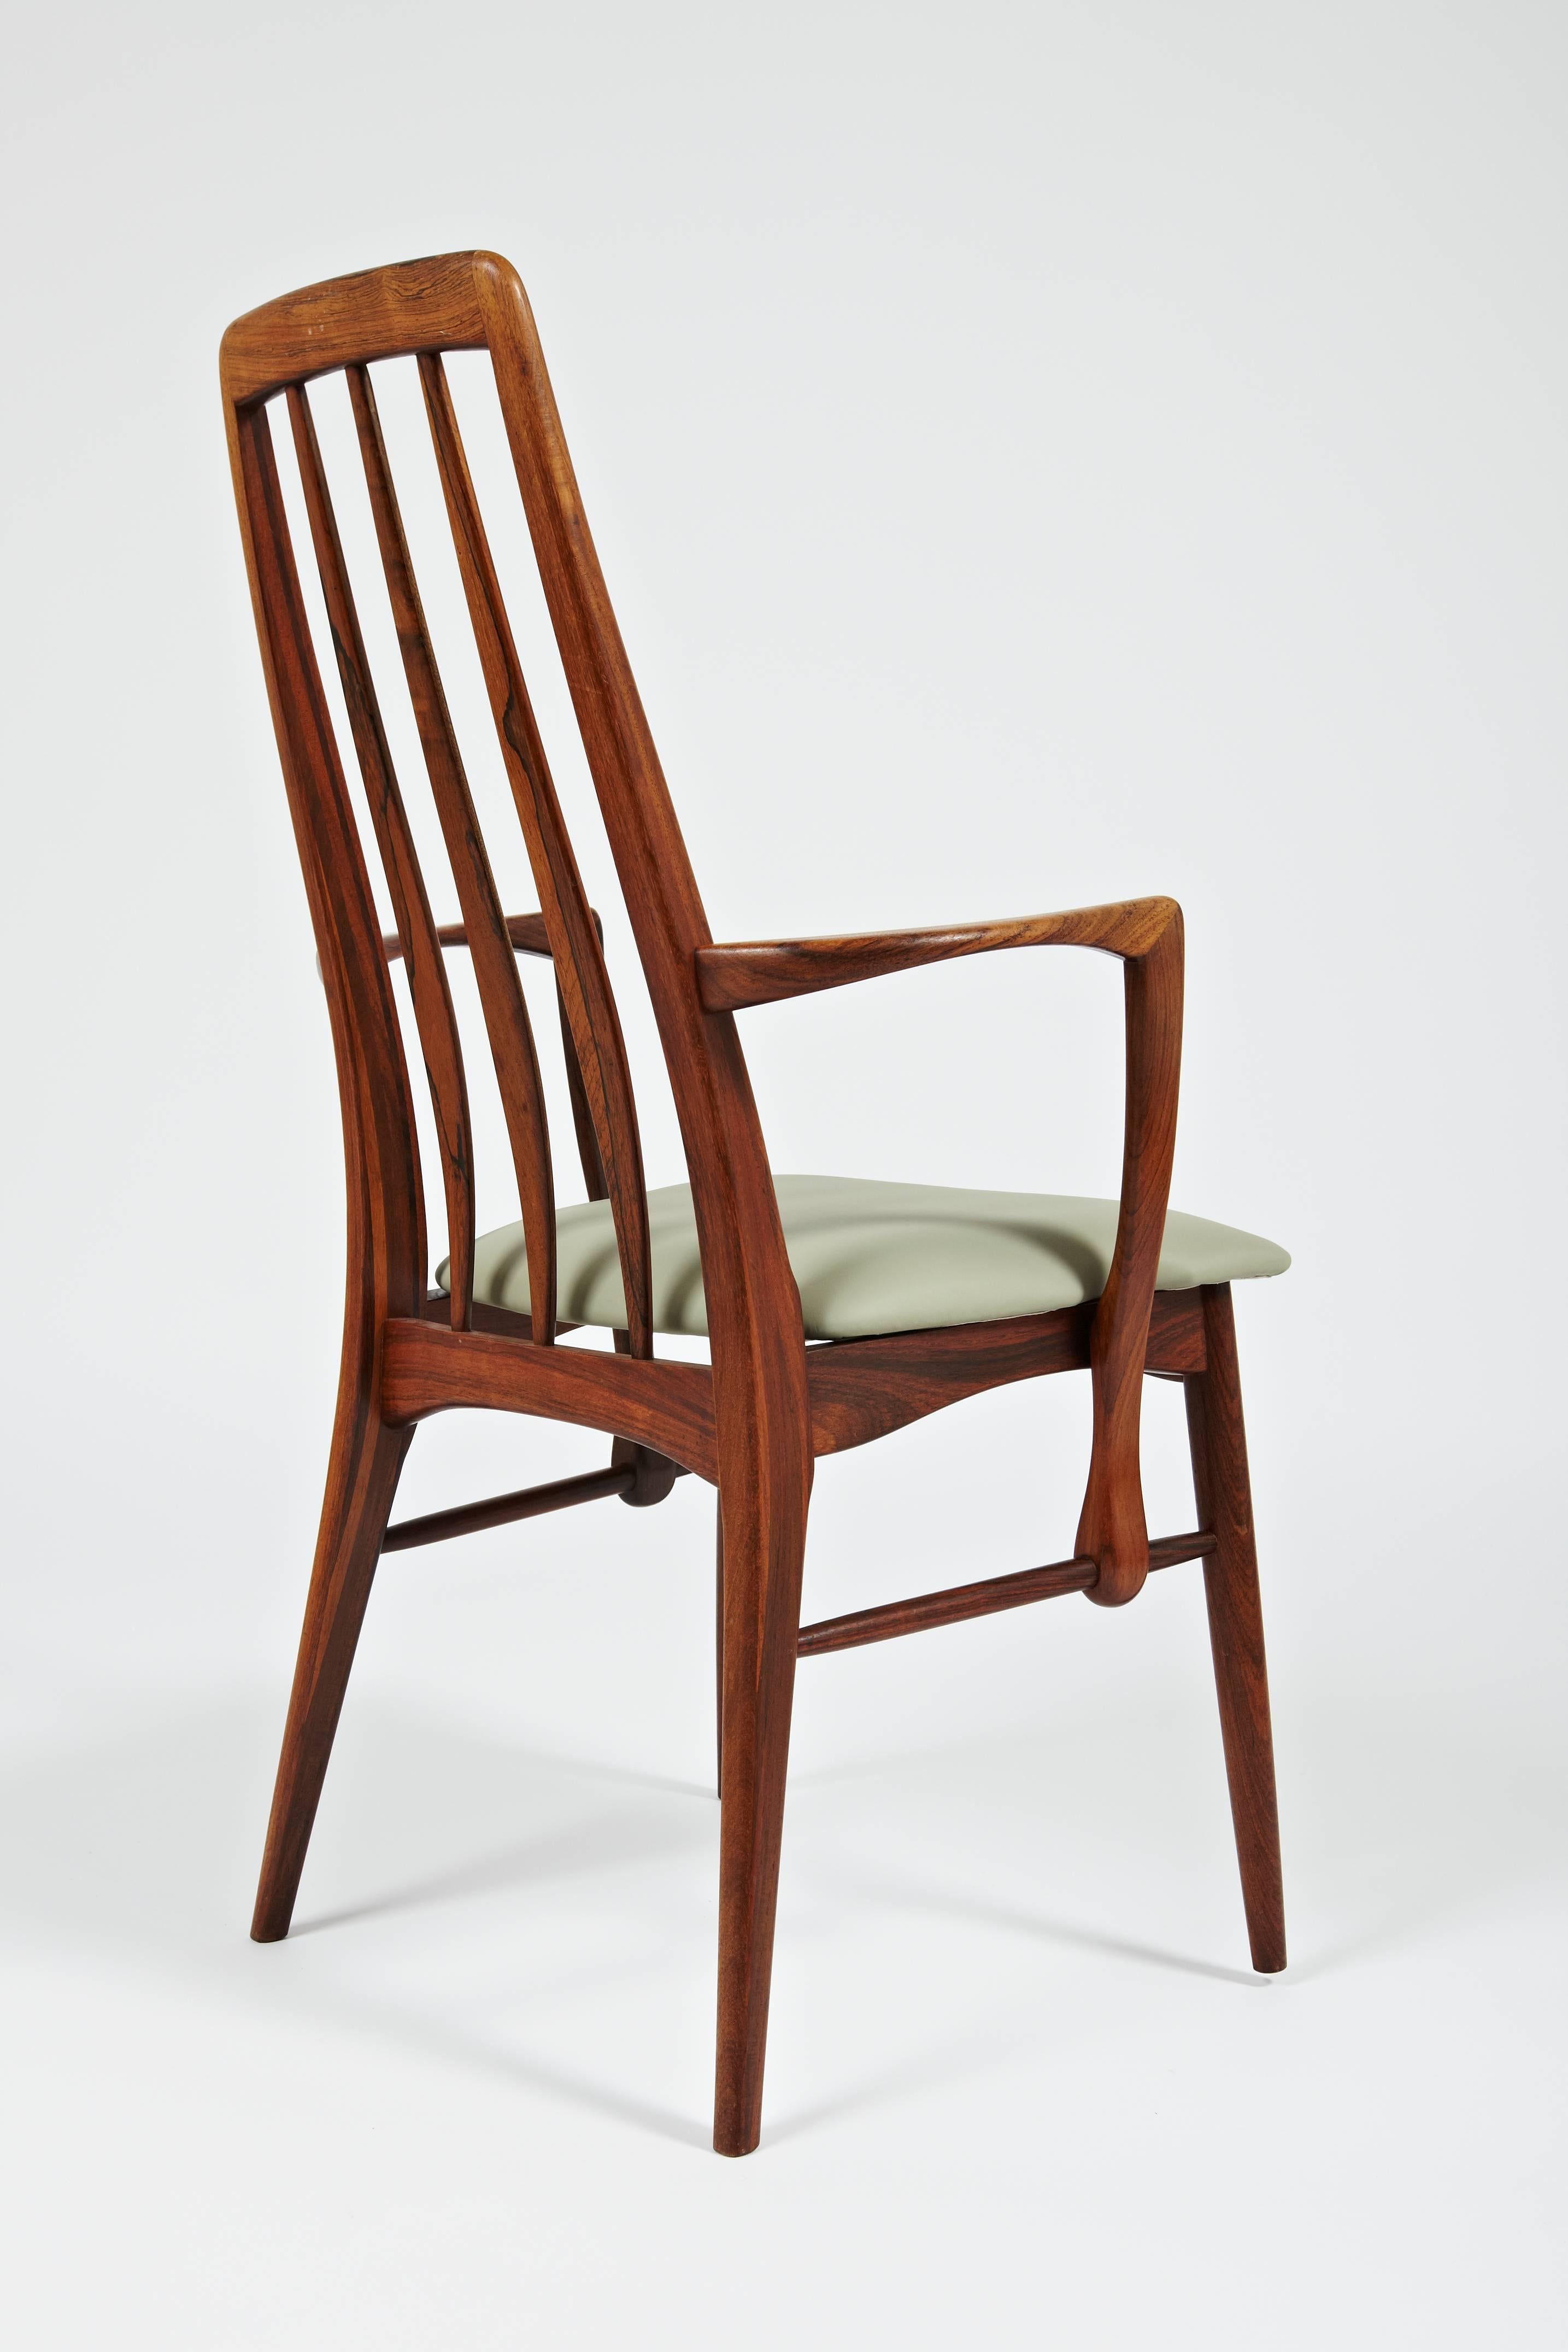 Danish Niels Kofoed Rosewood Dining Chair with Arms, circa 1964 For Sale